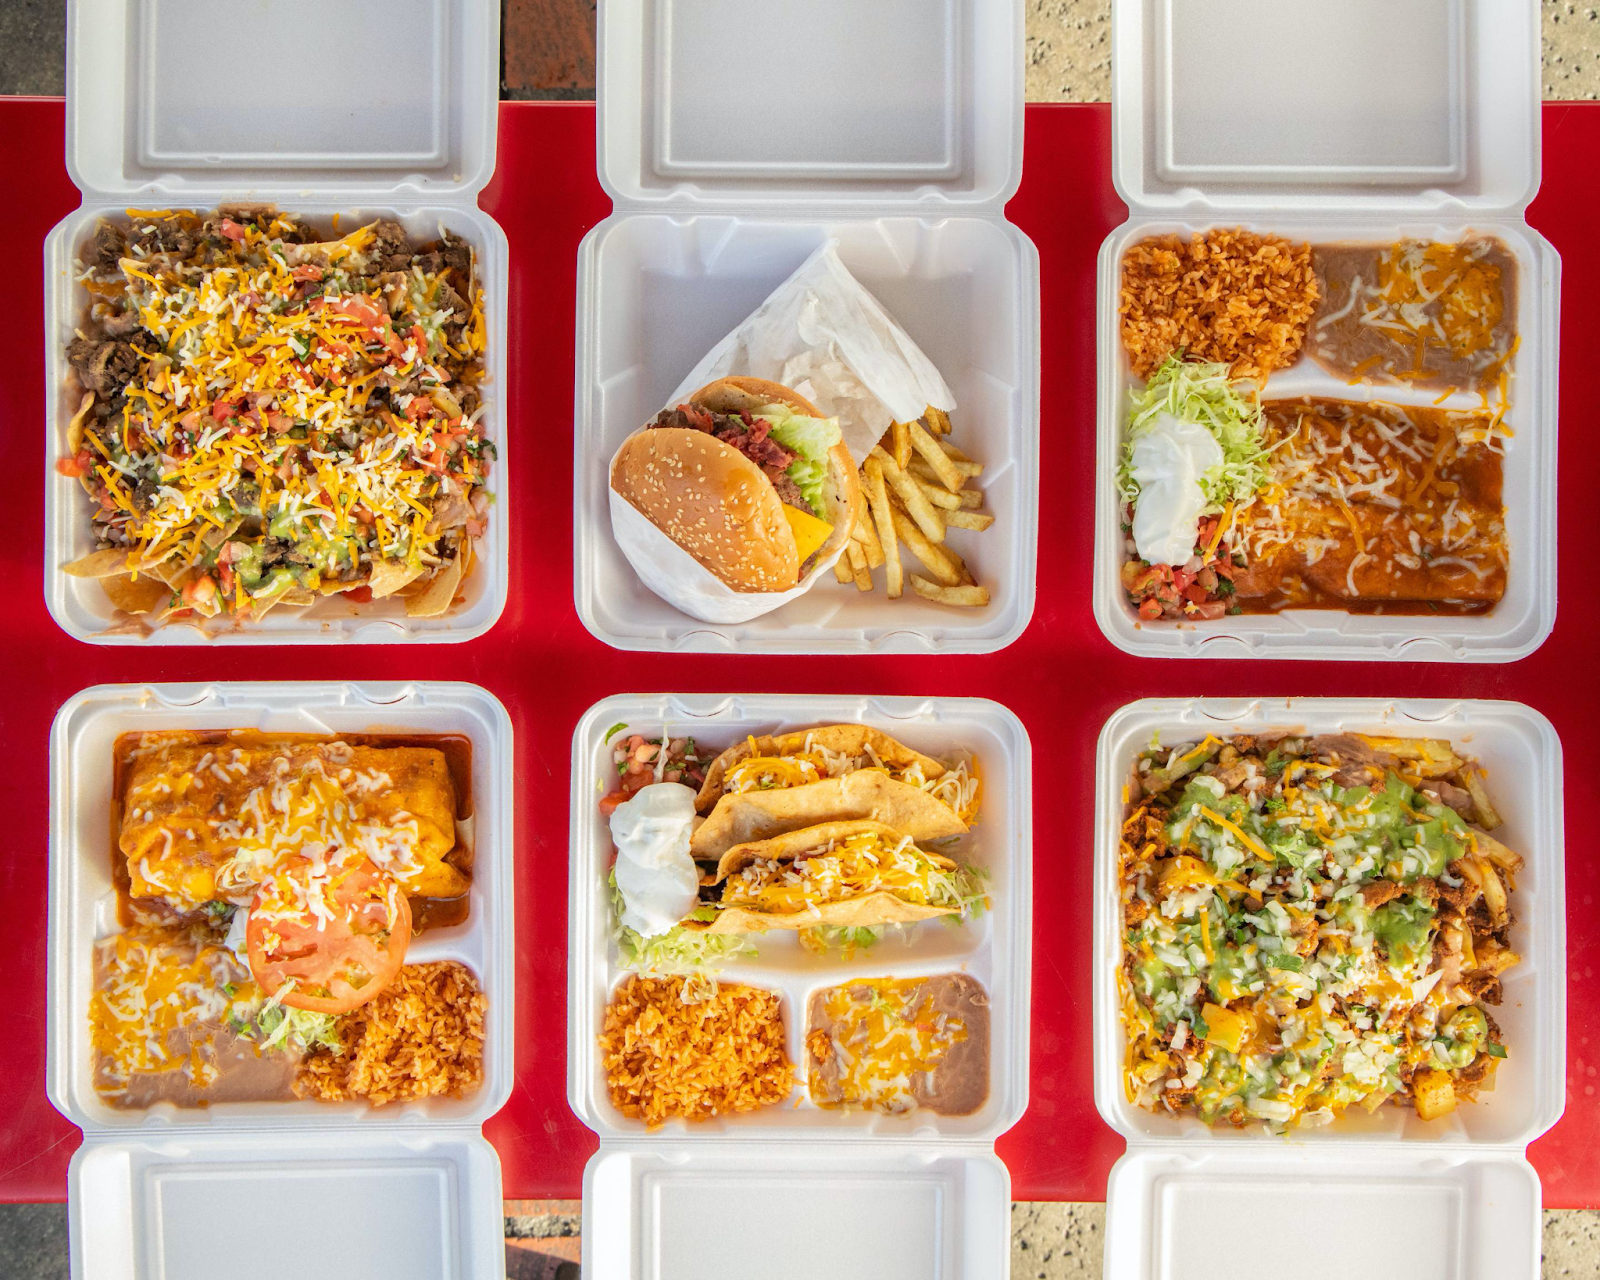 A variety of takeaway containers filled with Mexican food from El Huero’s.